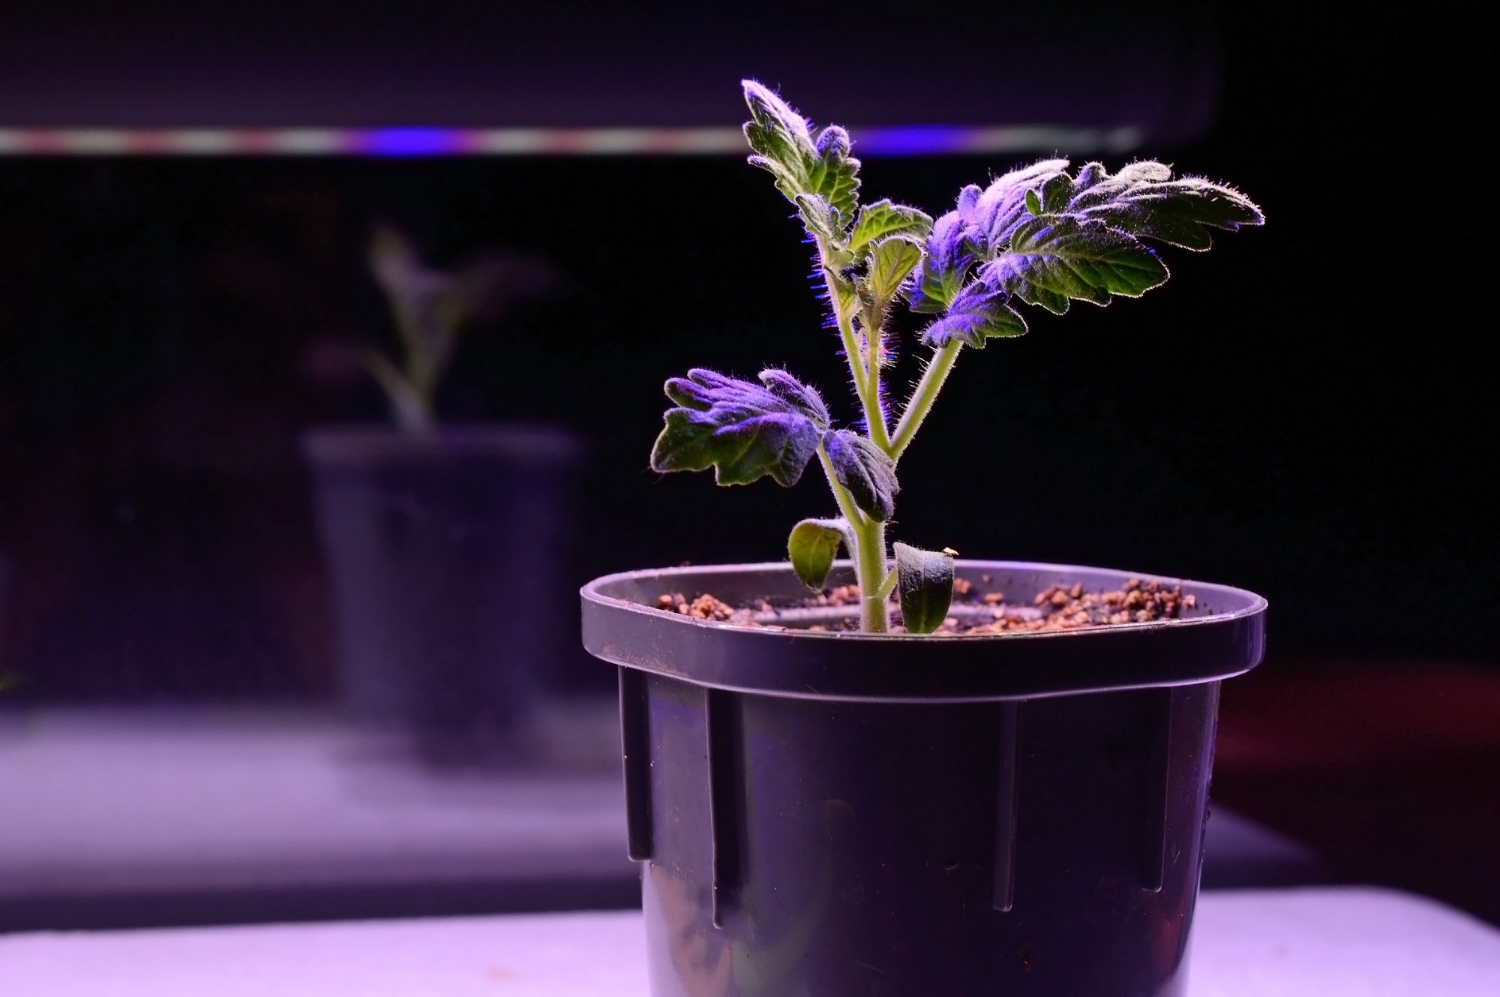 5 Things to Look for When Choosing the Best LED Grow Lights for Hydroponic Gardening